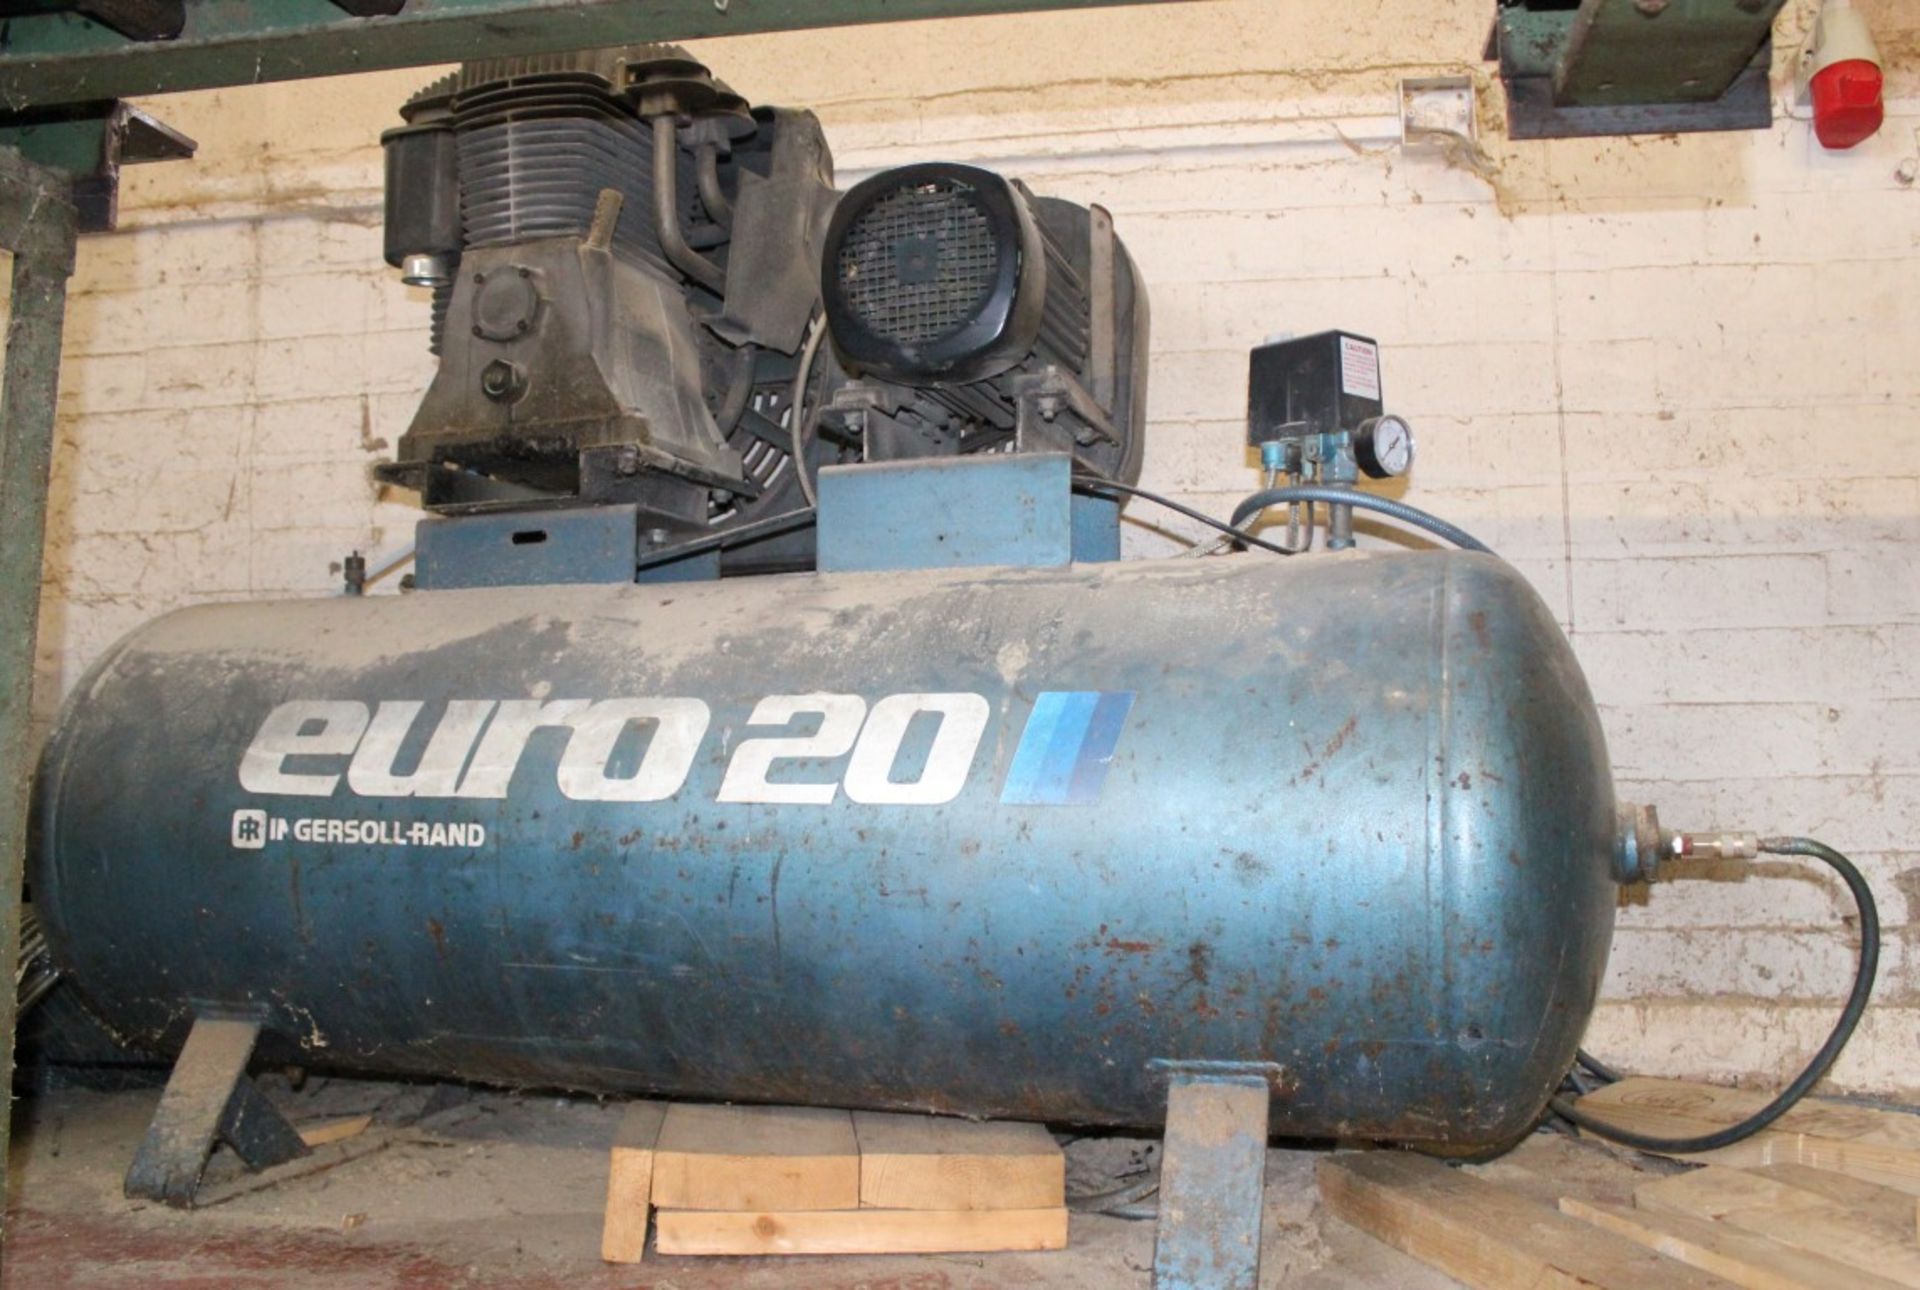 1 x Ingersoll-Rand Euro20 Compressor - 3 Phase - CL151 - Location: Manchester